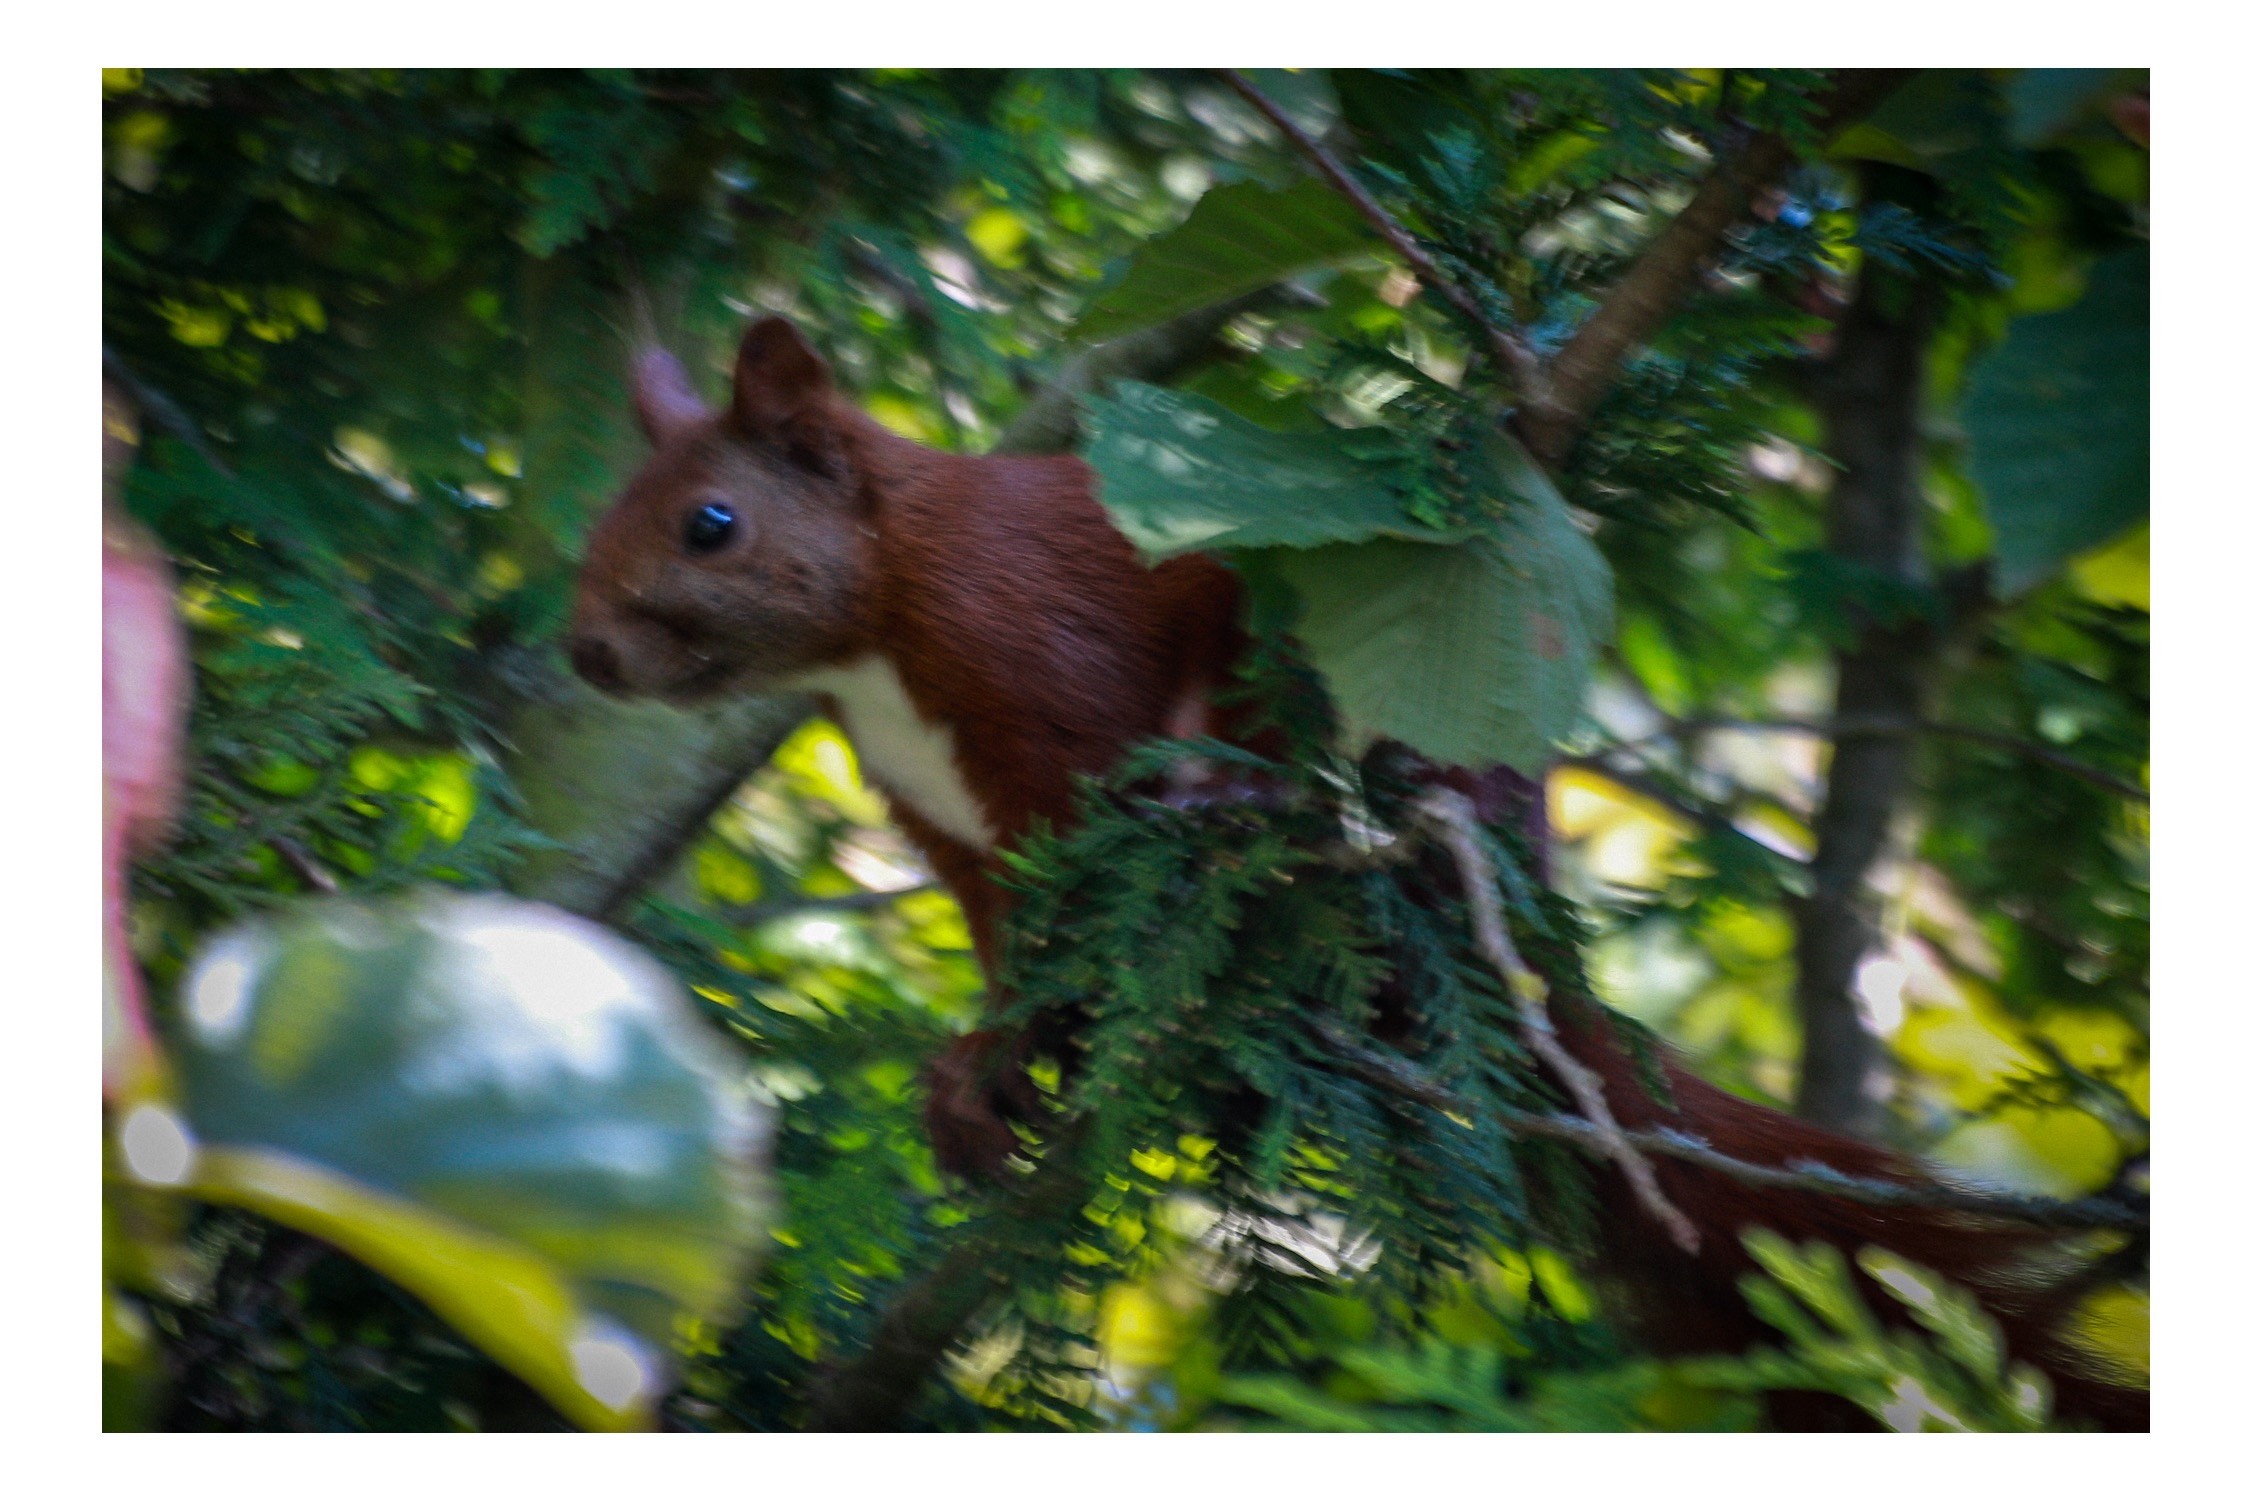 A red squirrel is perched on a tree branch surrounded by green foliage.